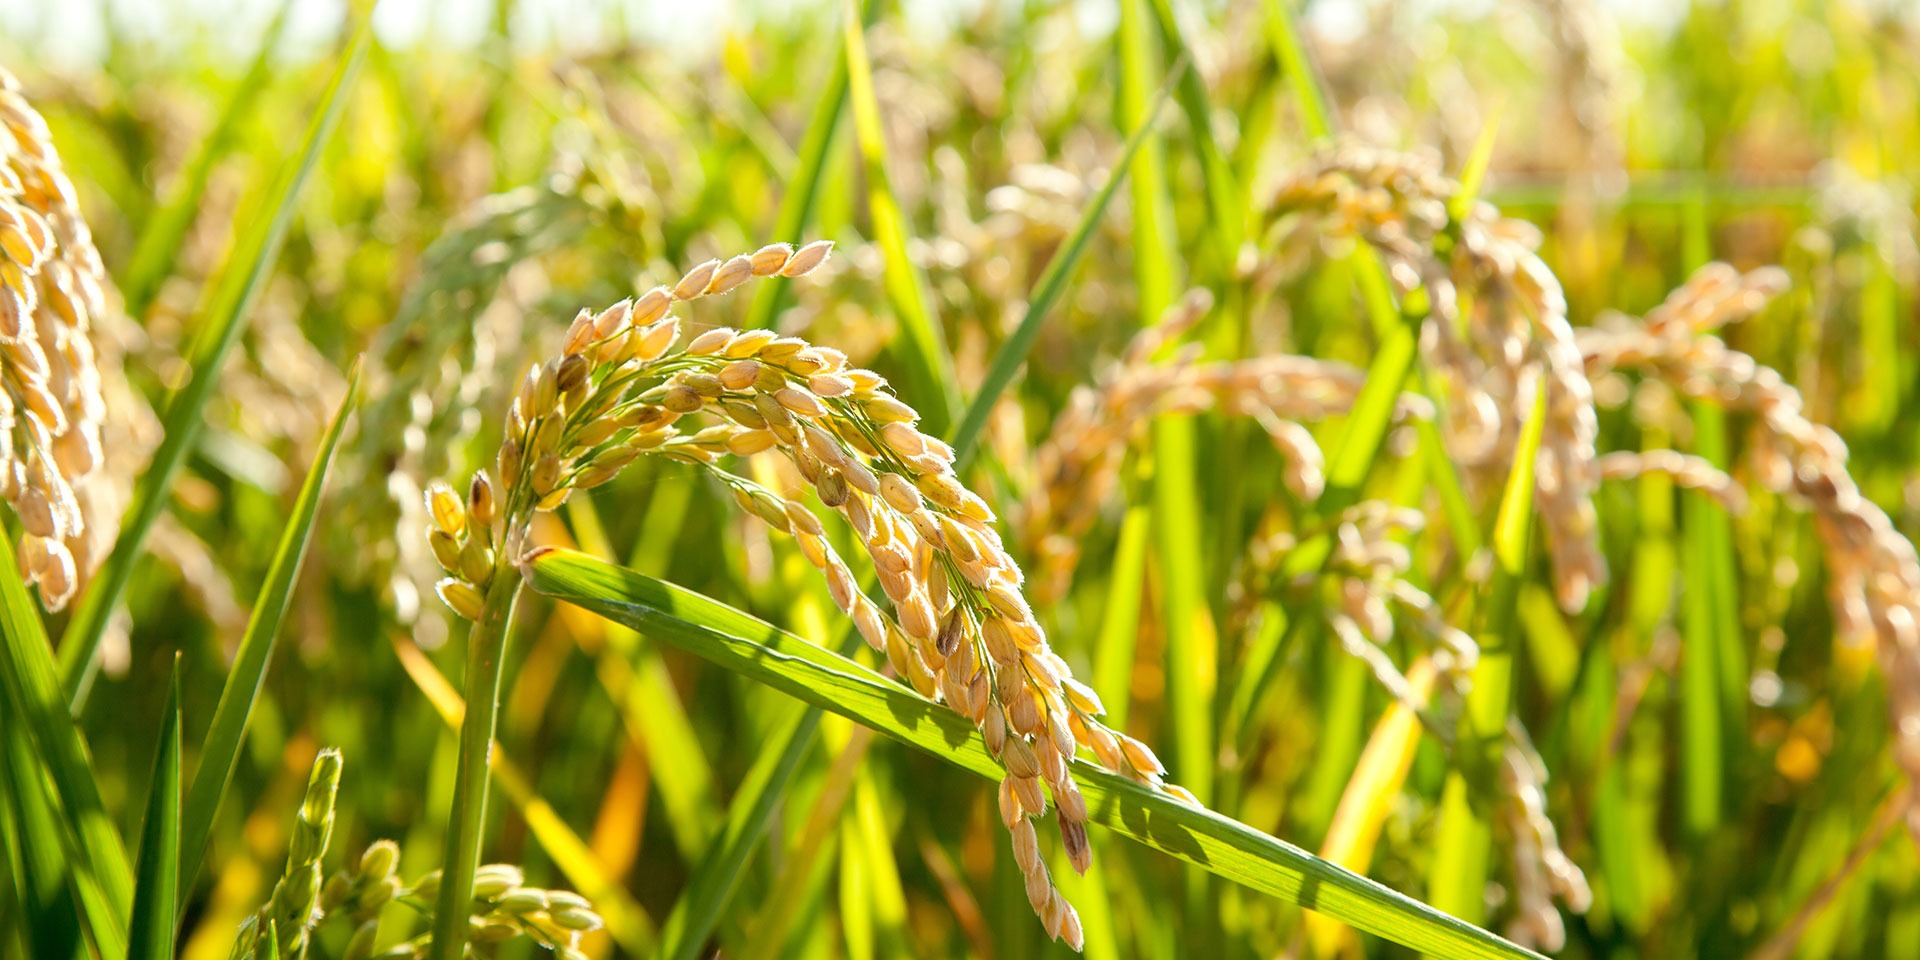 Is Rice Bad for the Environment?